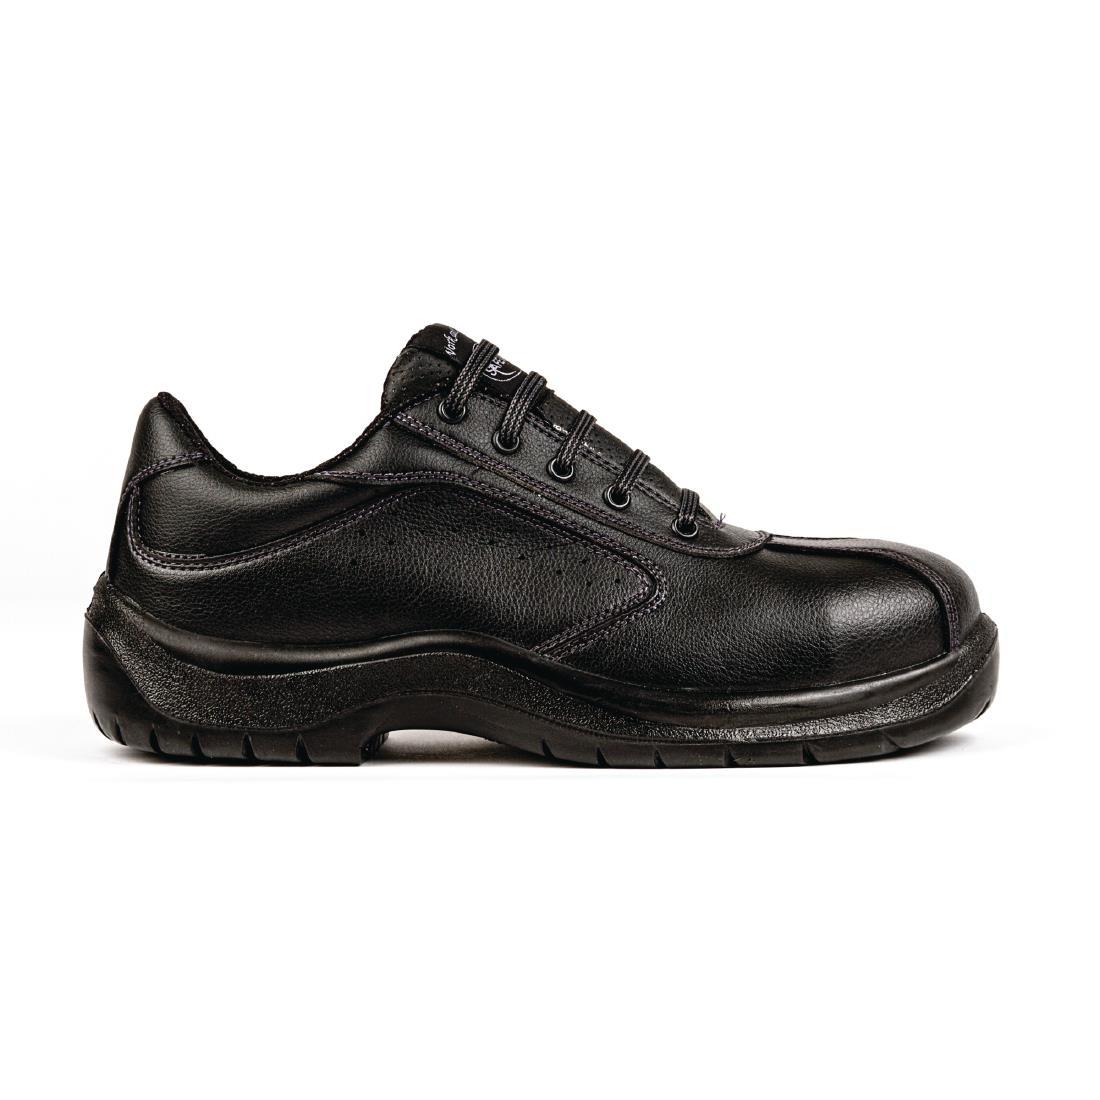 Slipbuster Side Perforated Lace Up Black 45